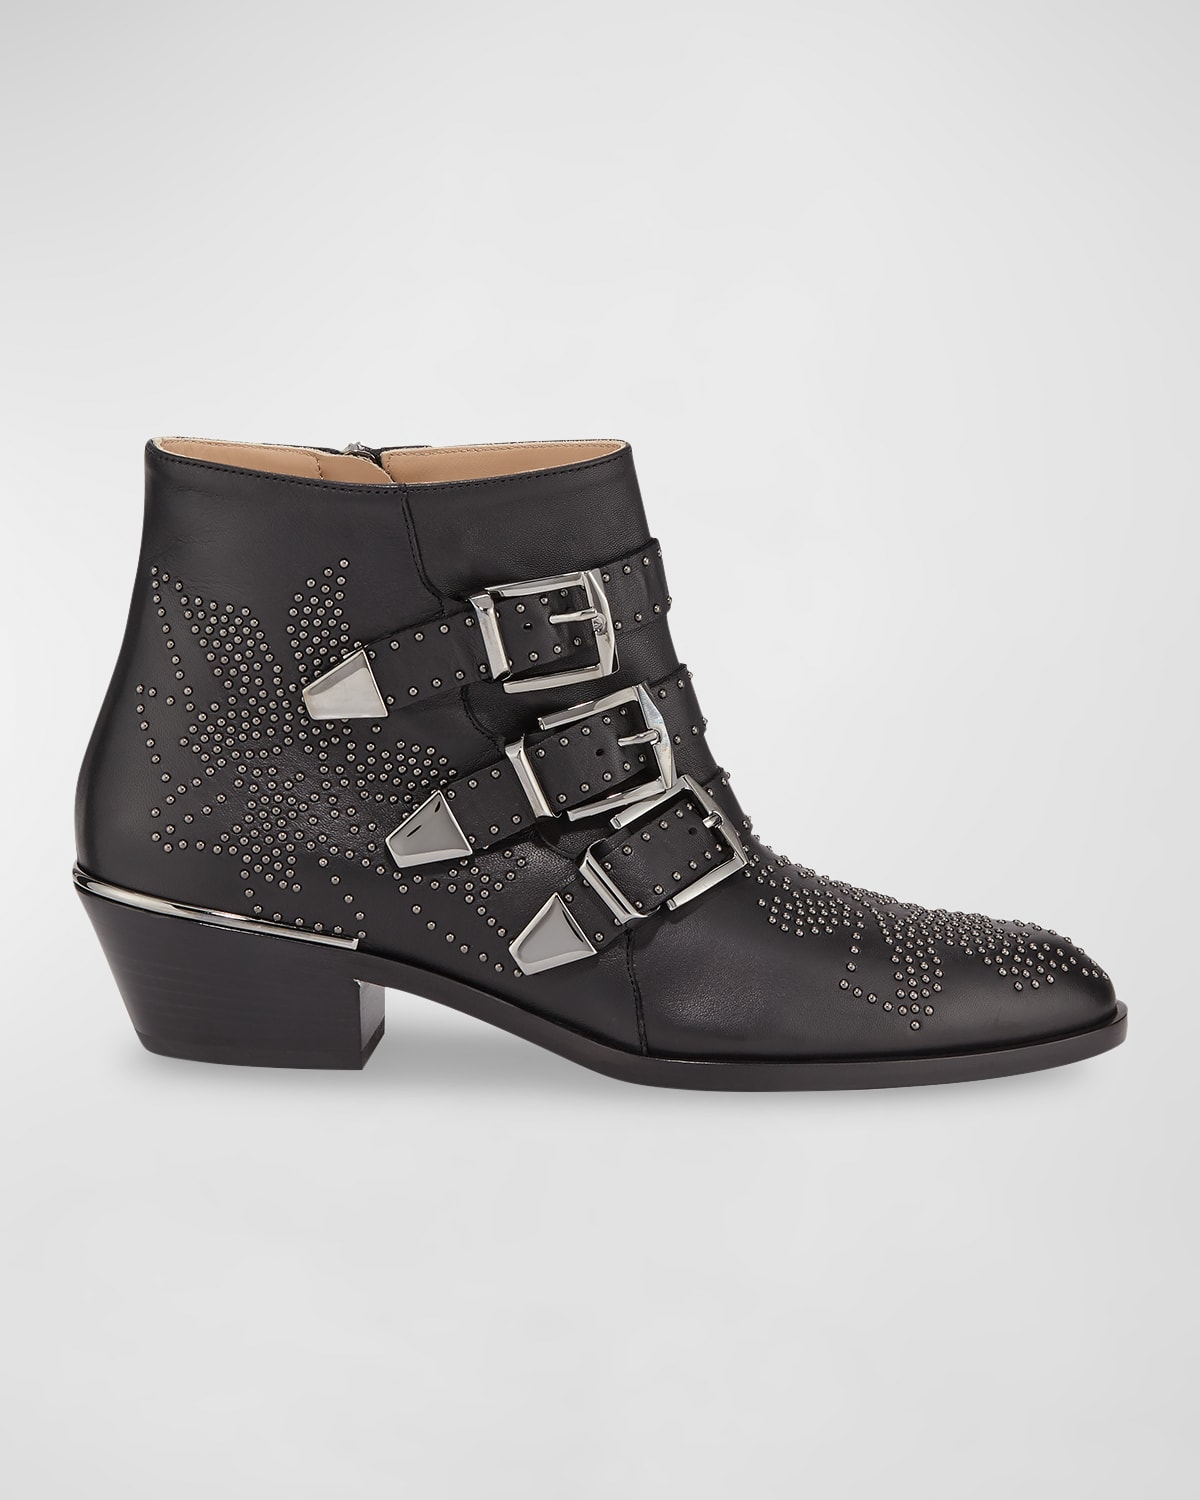 Black Studded Ankle Boots | Neiman Marcus